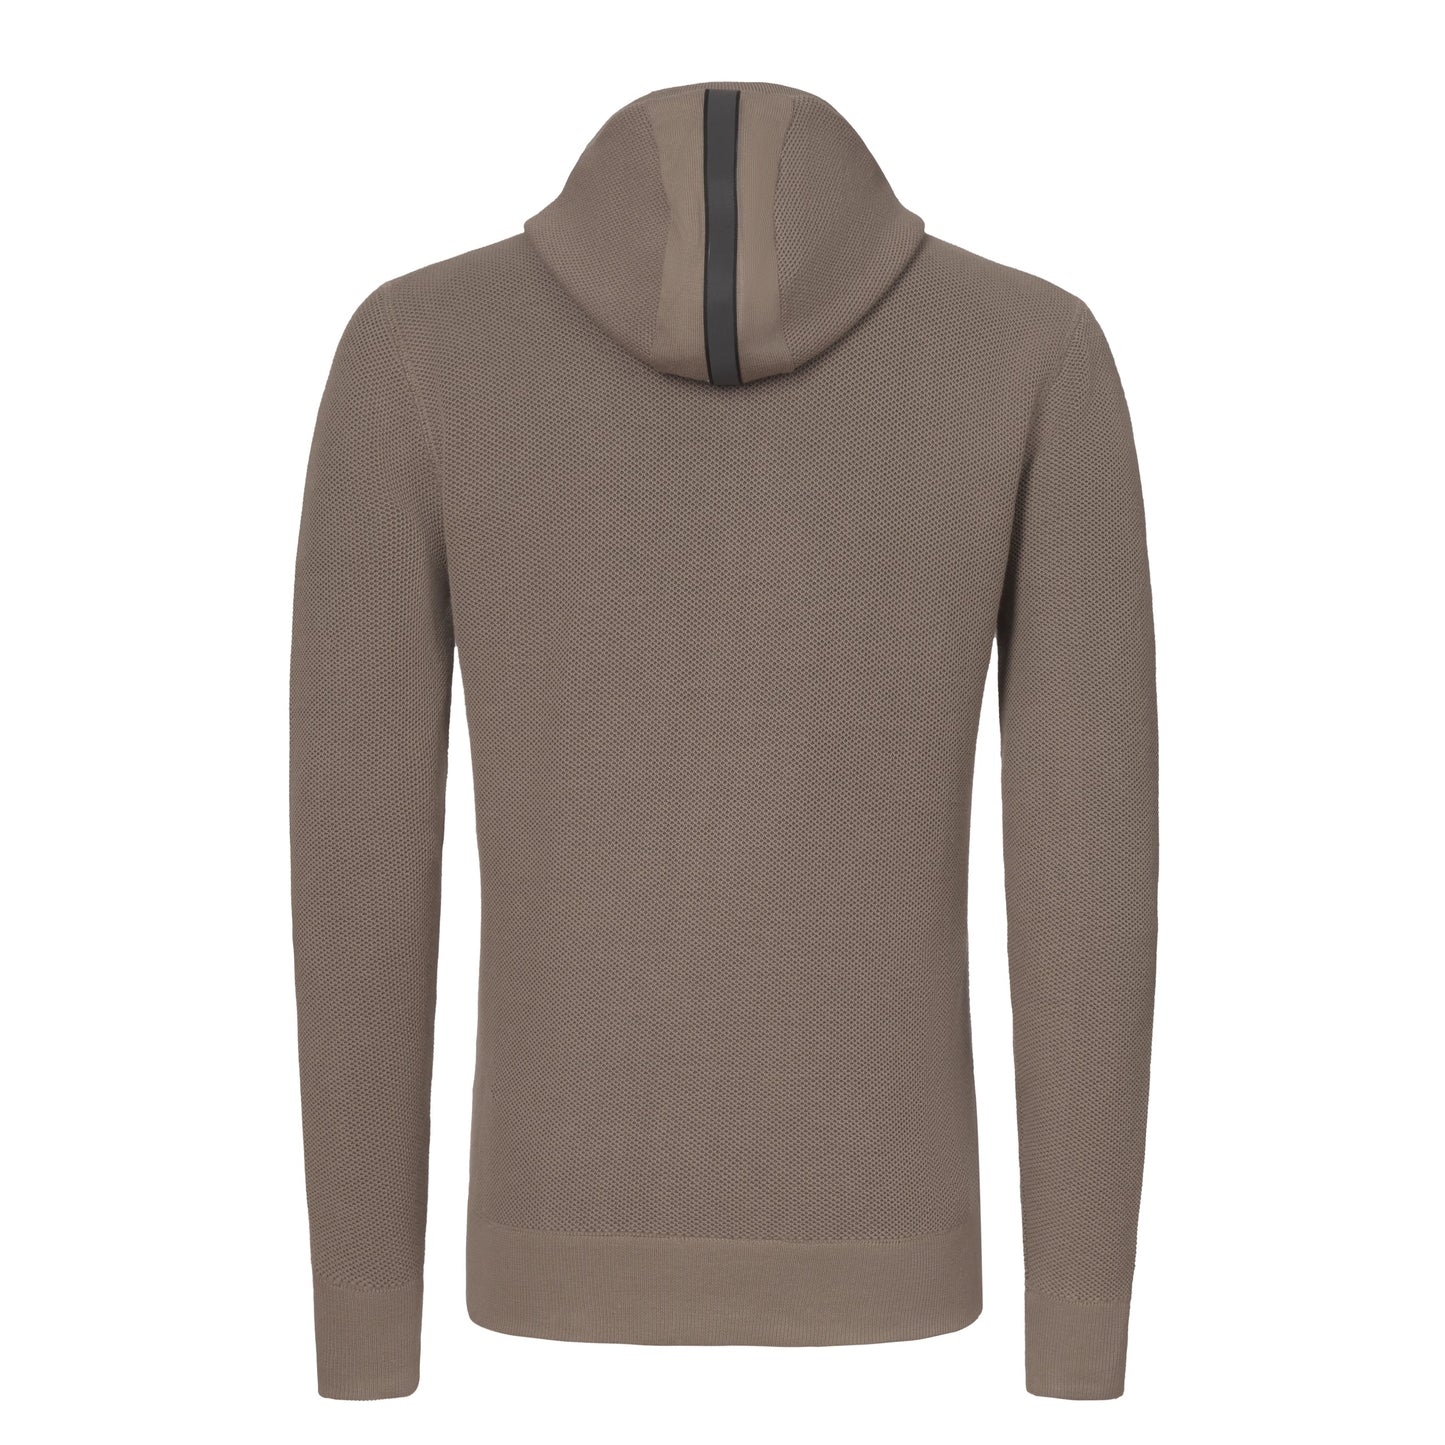 Sease Cotton - Blend Drawstring Hoodie in Sand with a Zipper - SARTALE